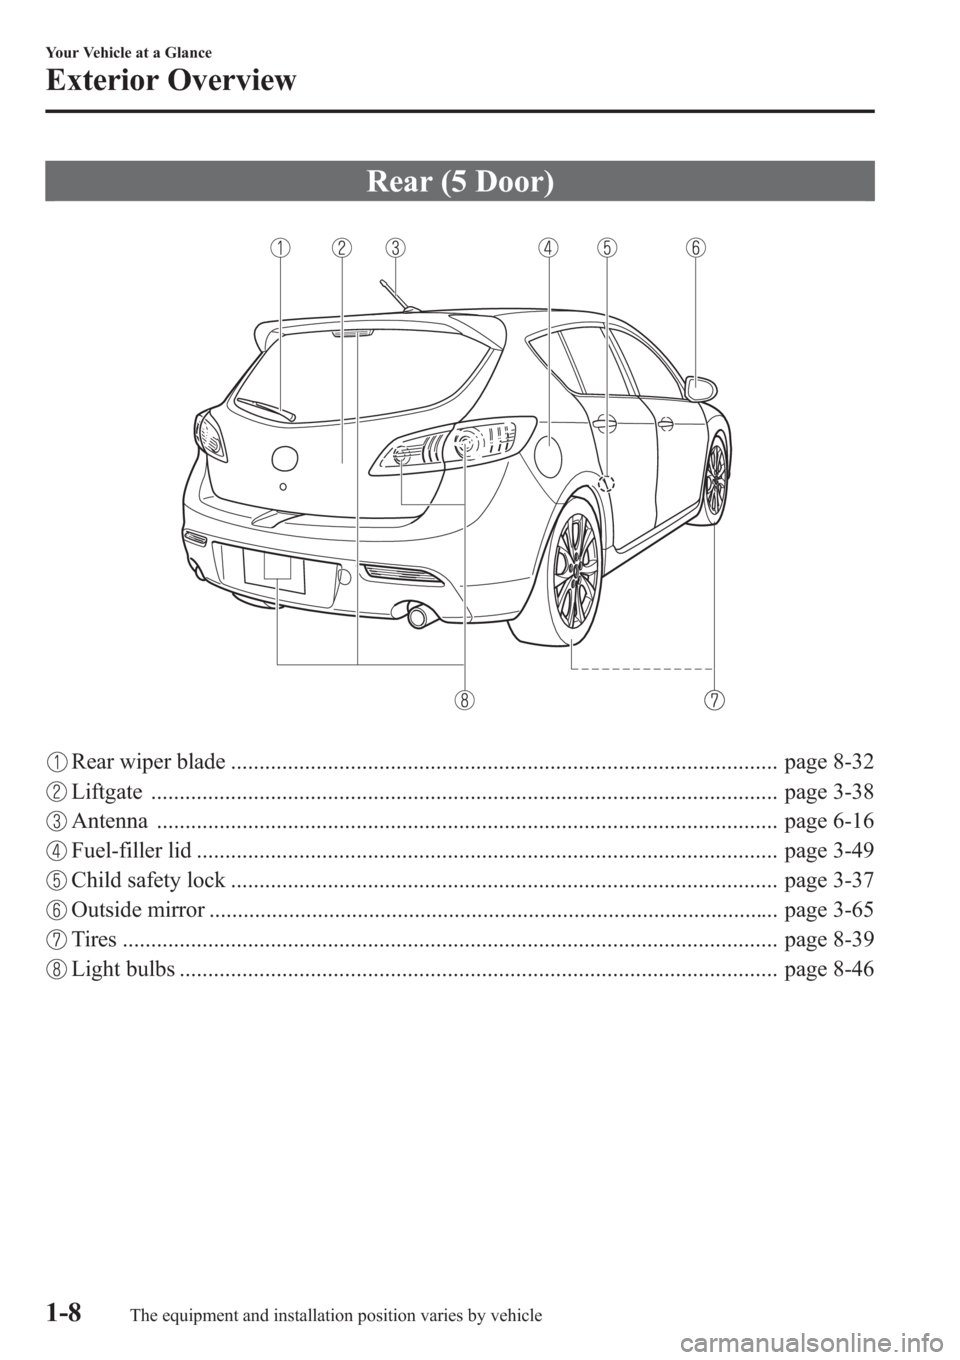 MAZDA MODEL 3 HATCHBACK 2013  Owners Manual (in English) Rear (5 Door)
Rear wiper blade ................................................................................................ page 8-32
Liftgate .....................................................